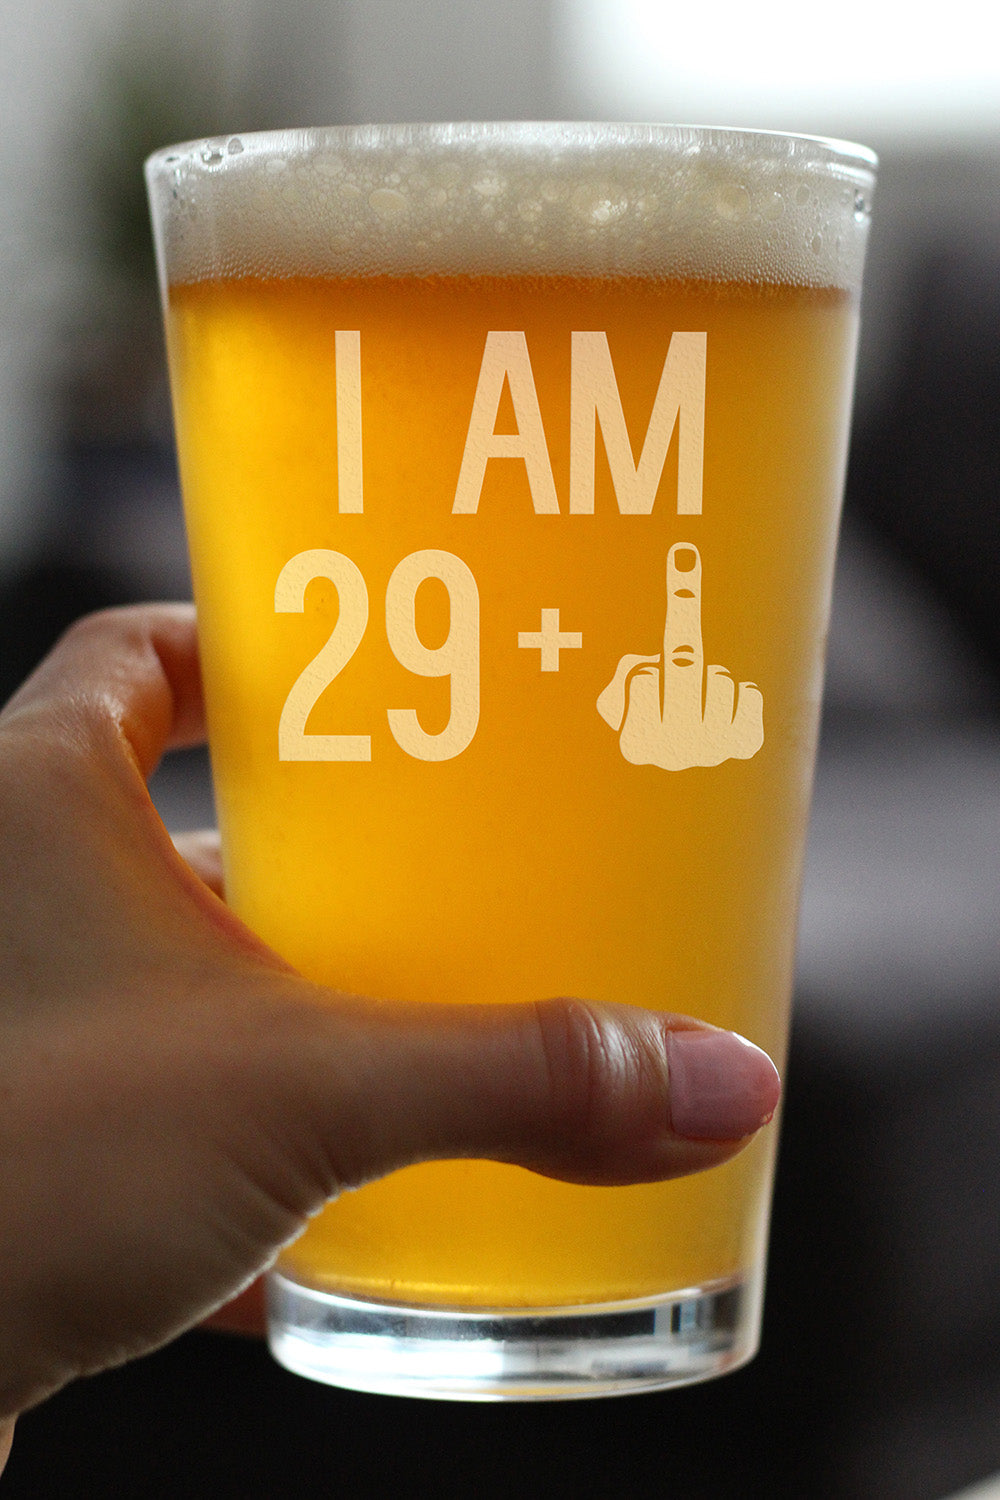 29 + 1 Middle Finger - 16 oz Pint Glass for Beer - Funny 30th Birthday Gifts for Men and Women Turning 30